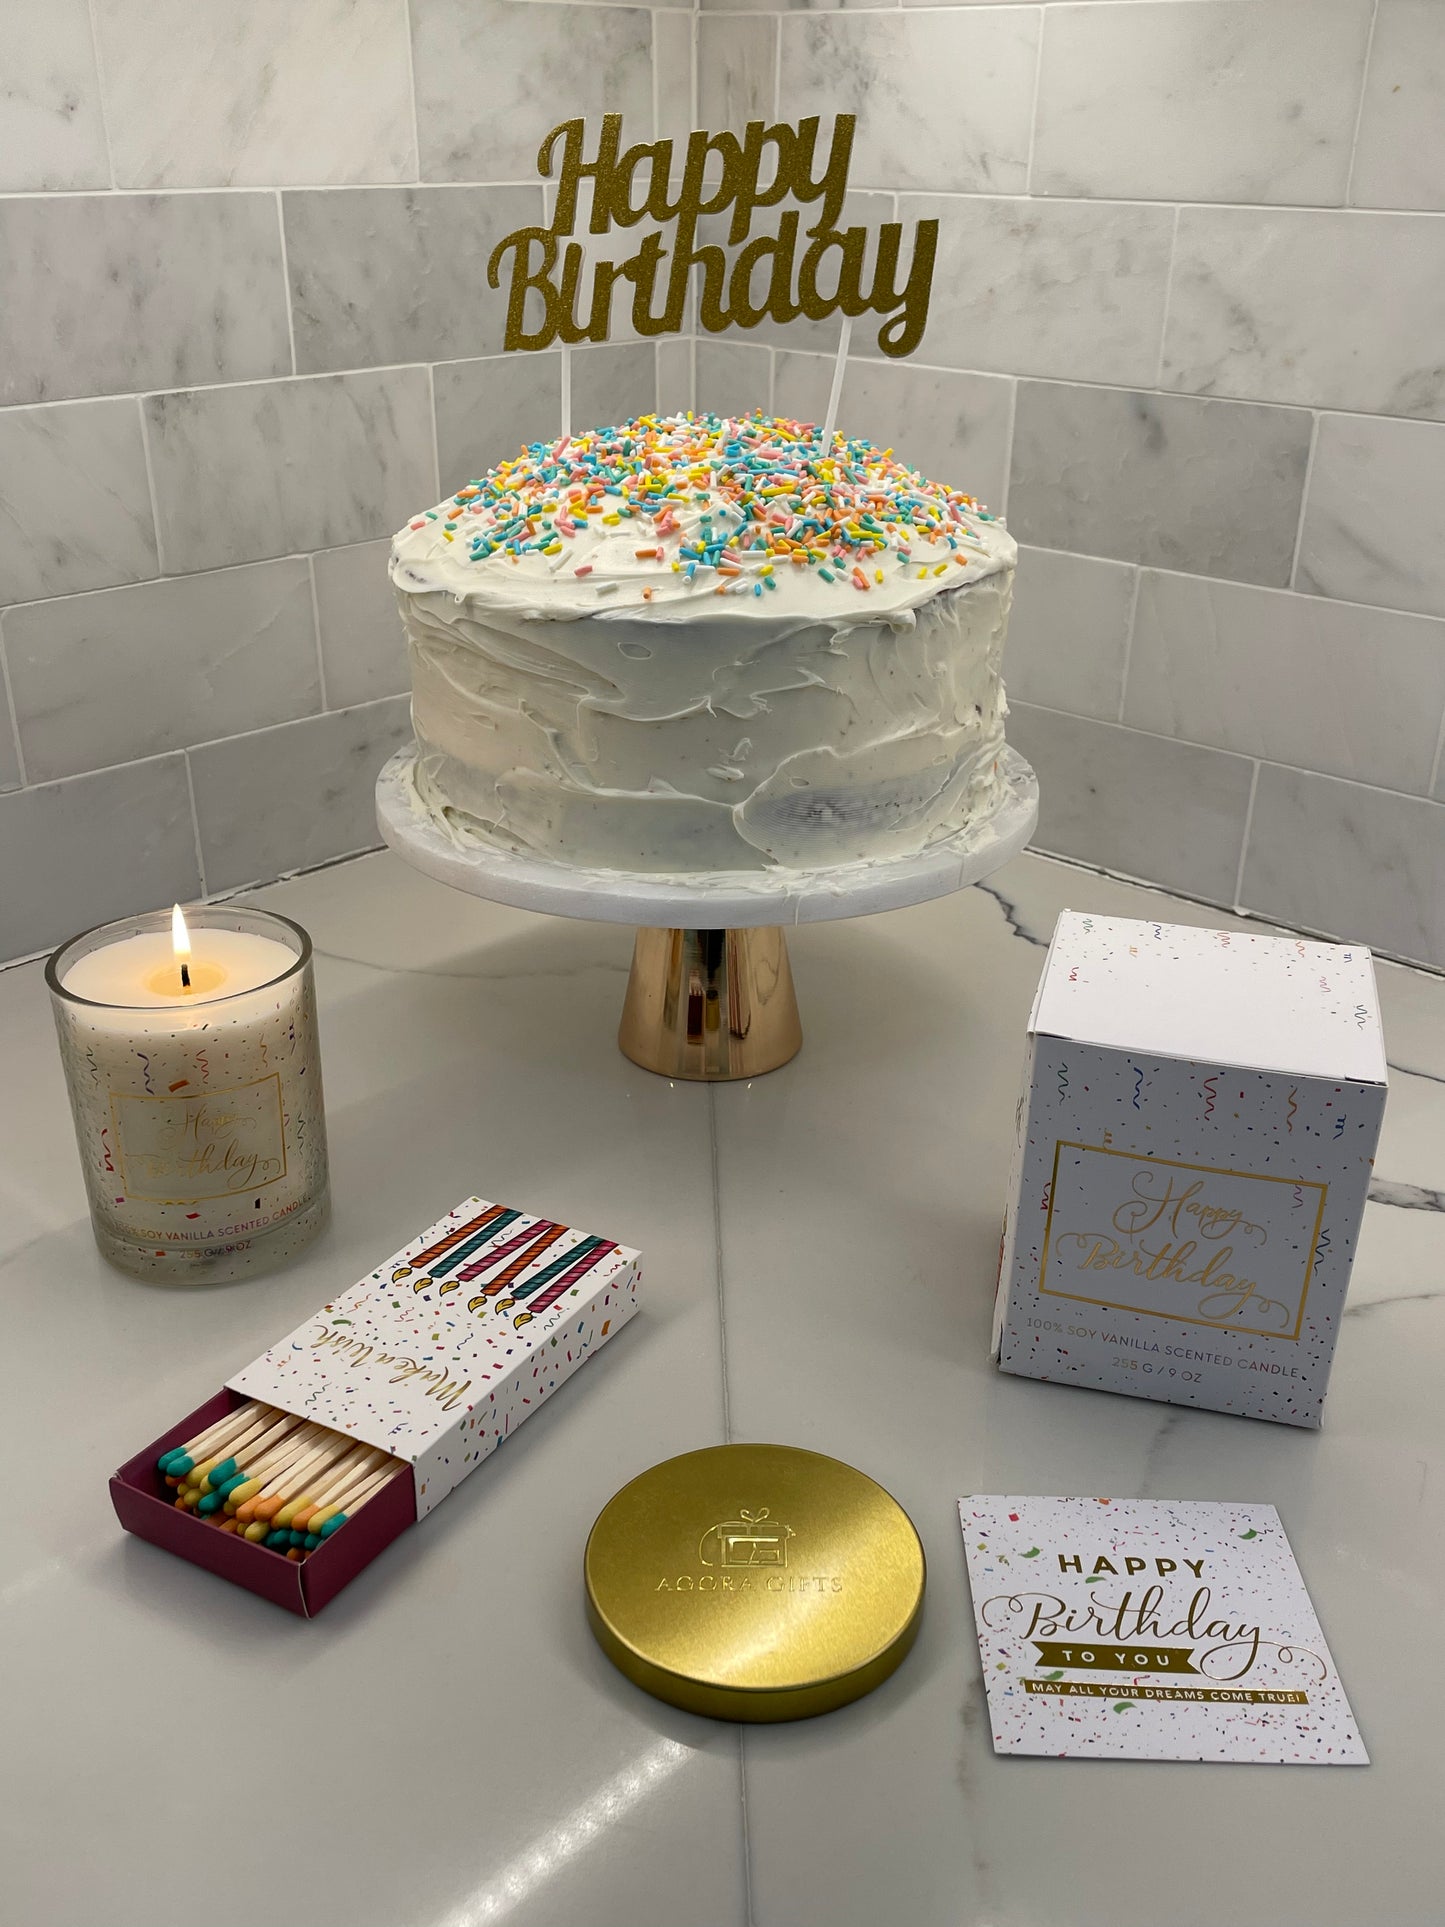 Happy Birthday Candle - 100% Soy Vanilla-Cake Scented Candle in Beautiful Decor Glass Jar 9oz - Unique Gift Set with Cute Birthday Card